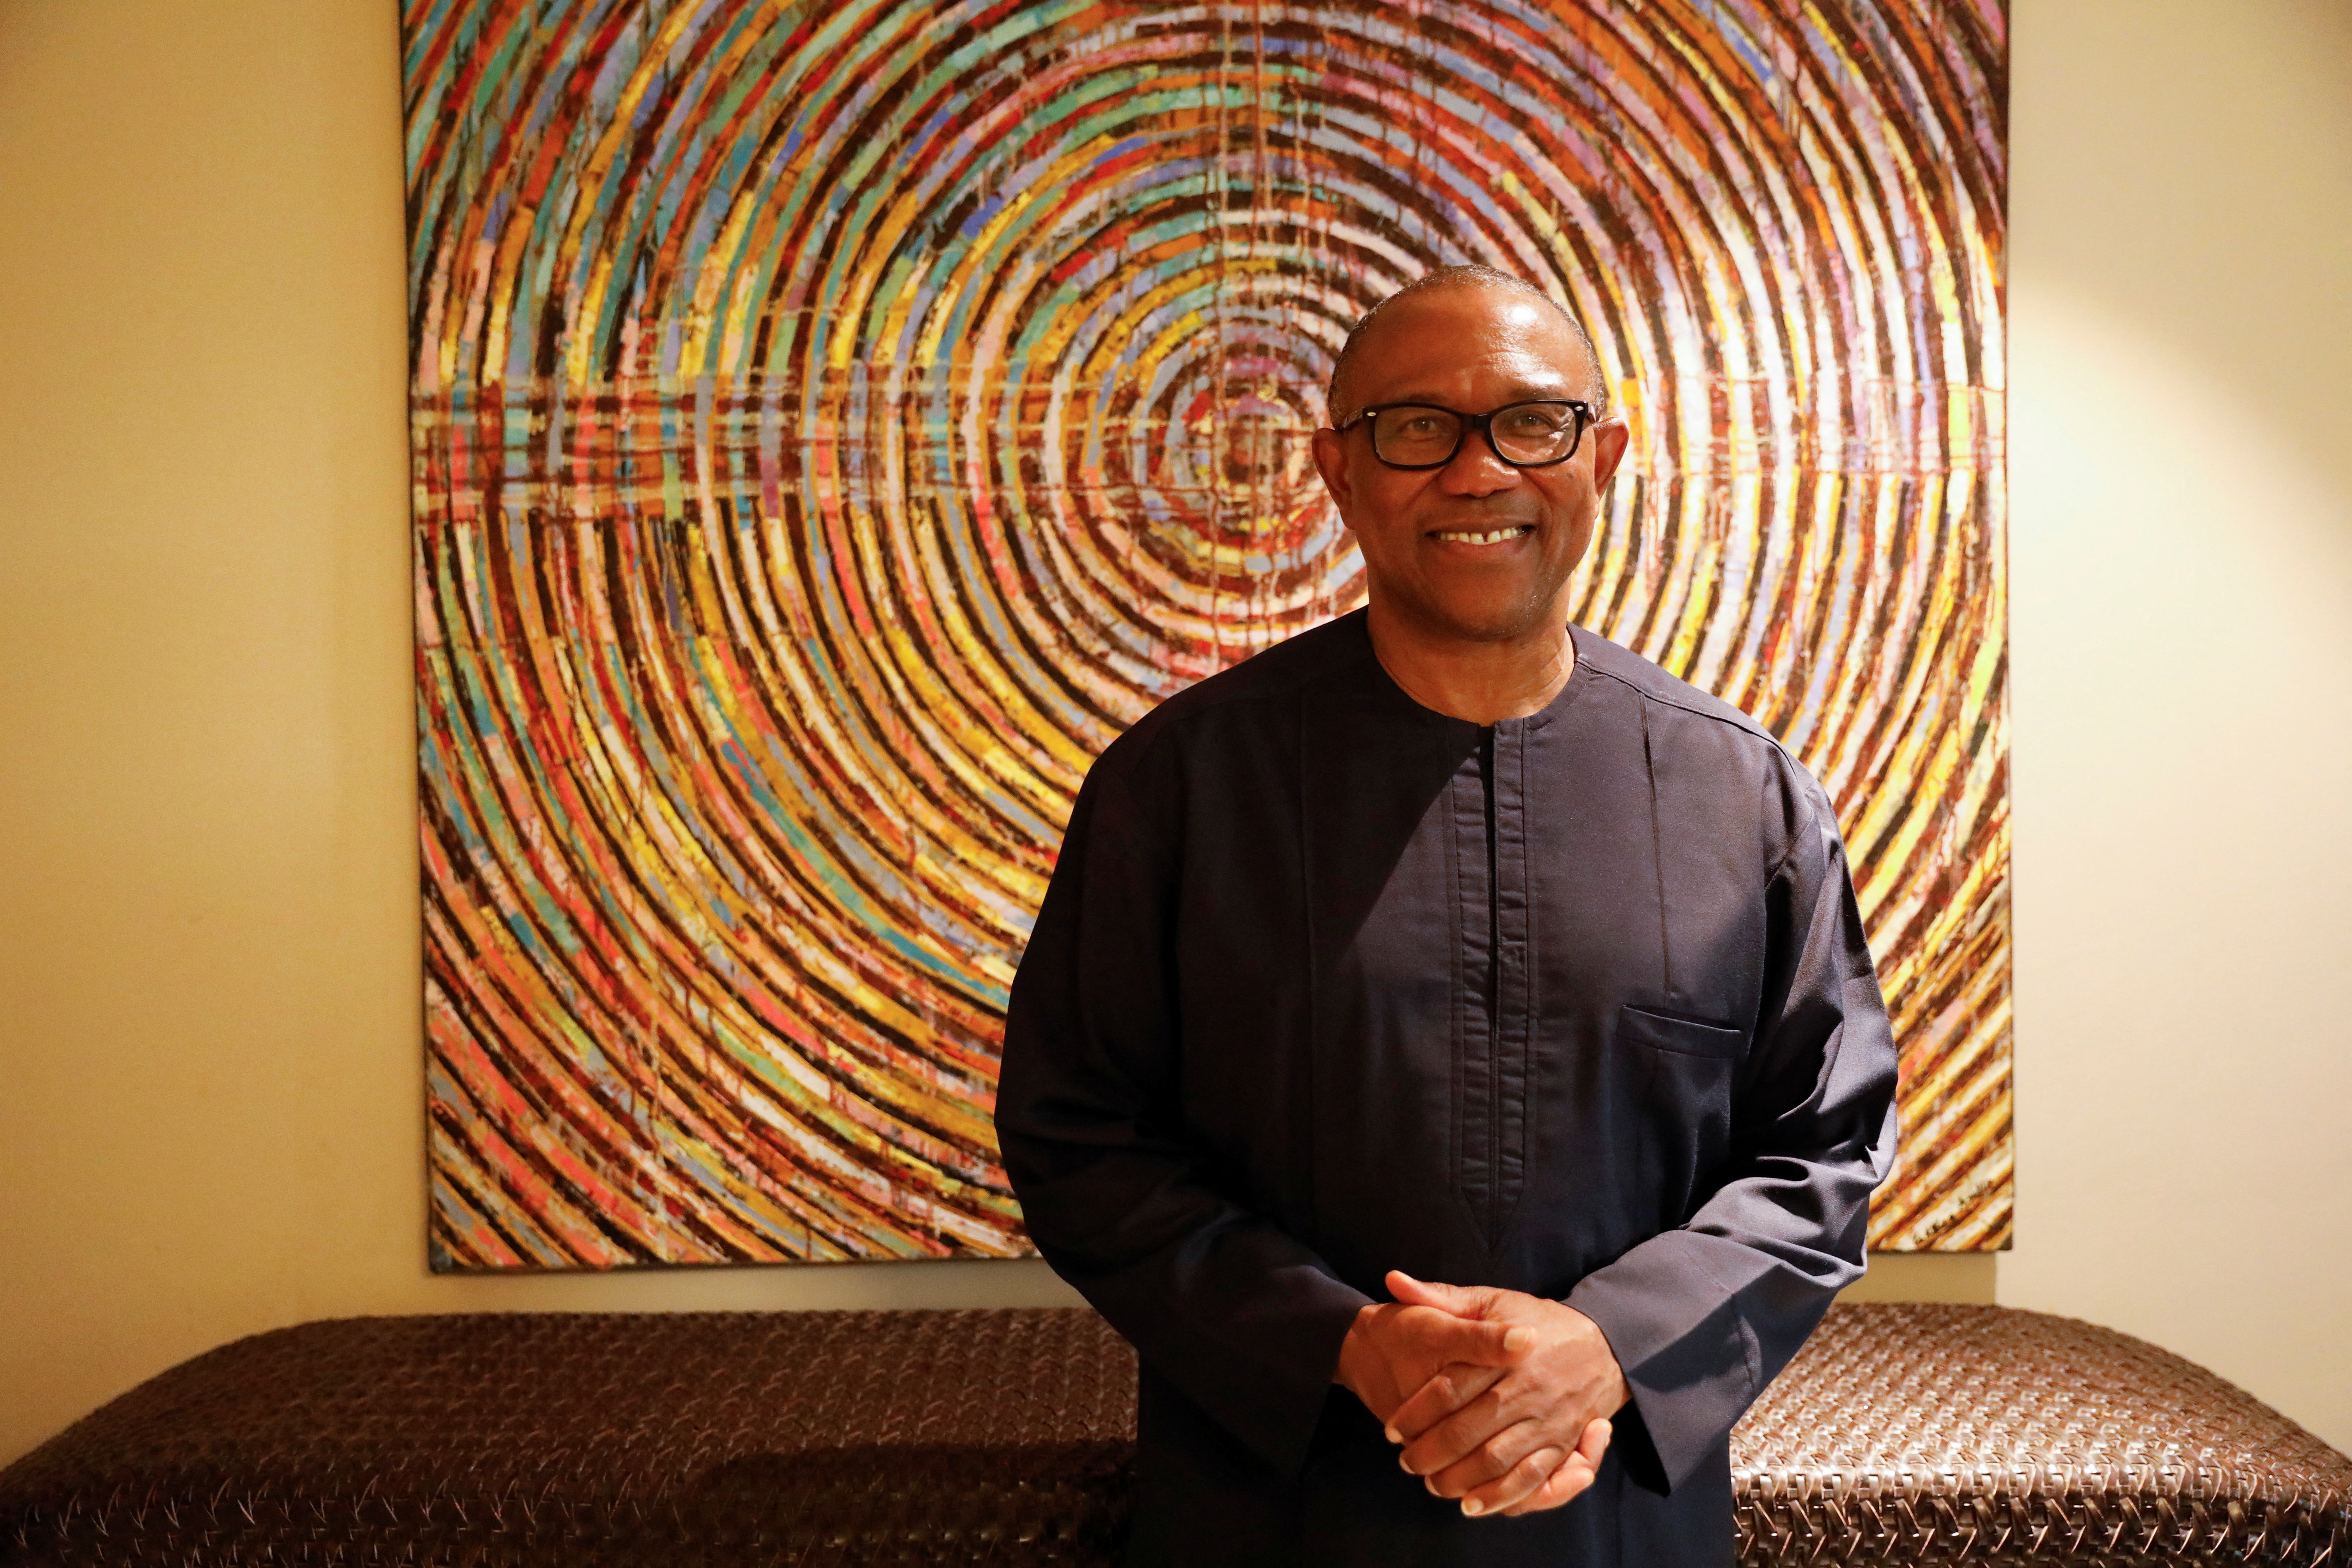 Peter Obi, Presidential candidate of the Labour Party, poses for a picture after an interview with Reuters at his residence in Lagos